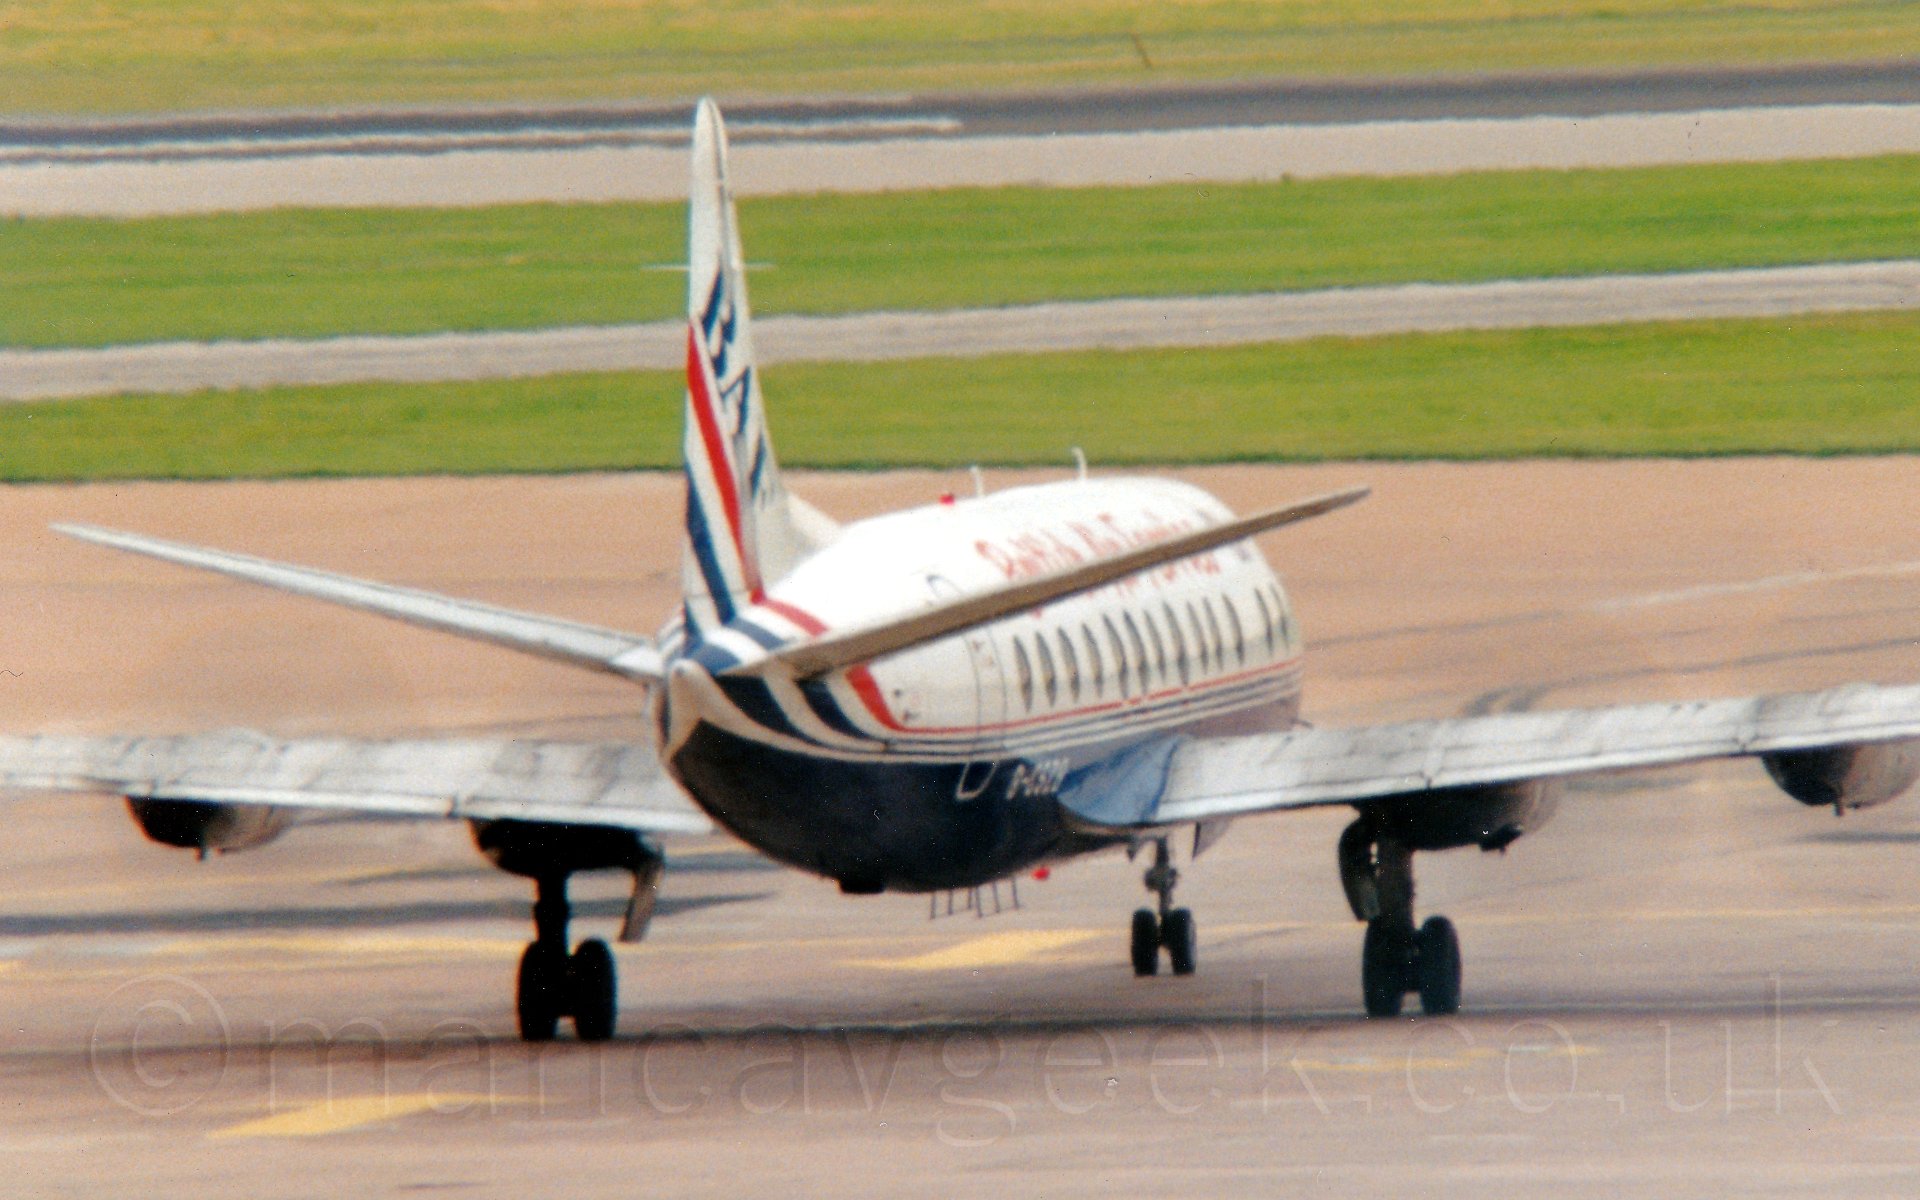 Rear view of a 4 propellor-engined airliner taxiing away from the camera and slightly to the right. The plane is mostly white, with a red and blue stripe separating that from the blue belly. There are red "British Air Ferries" on the upper forward fuselage, and the registration "G-CSZB" on the lower rear fuselage in white. In the background, grey apron leads up to grass, which fills the rest of the frame.